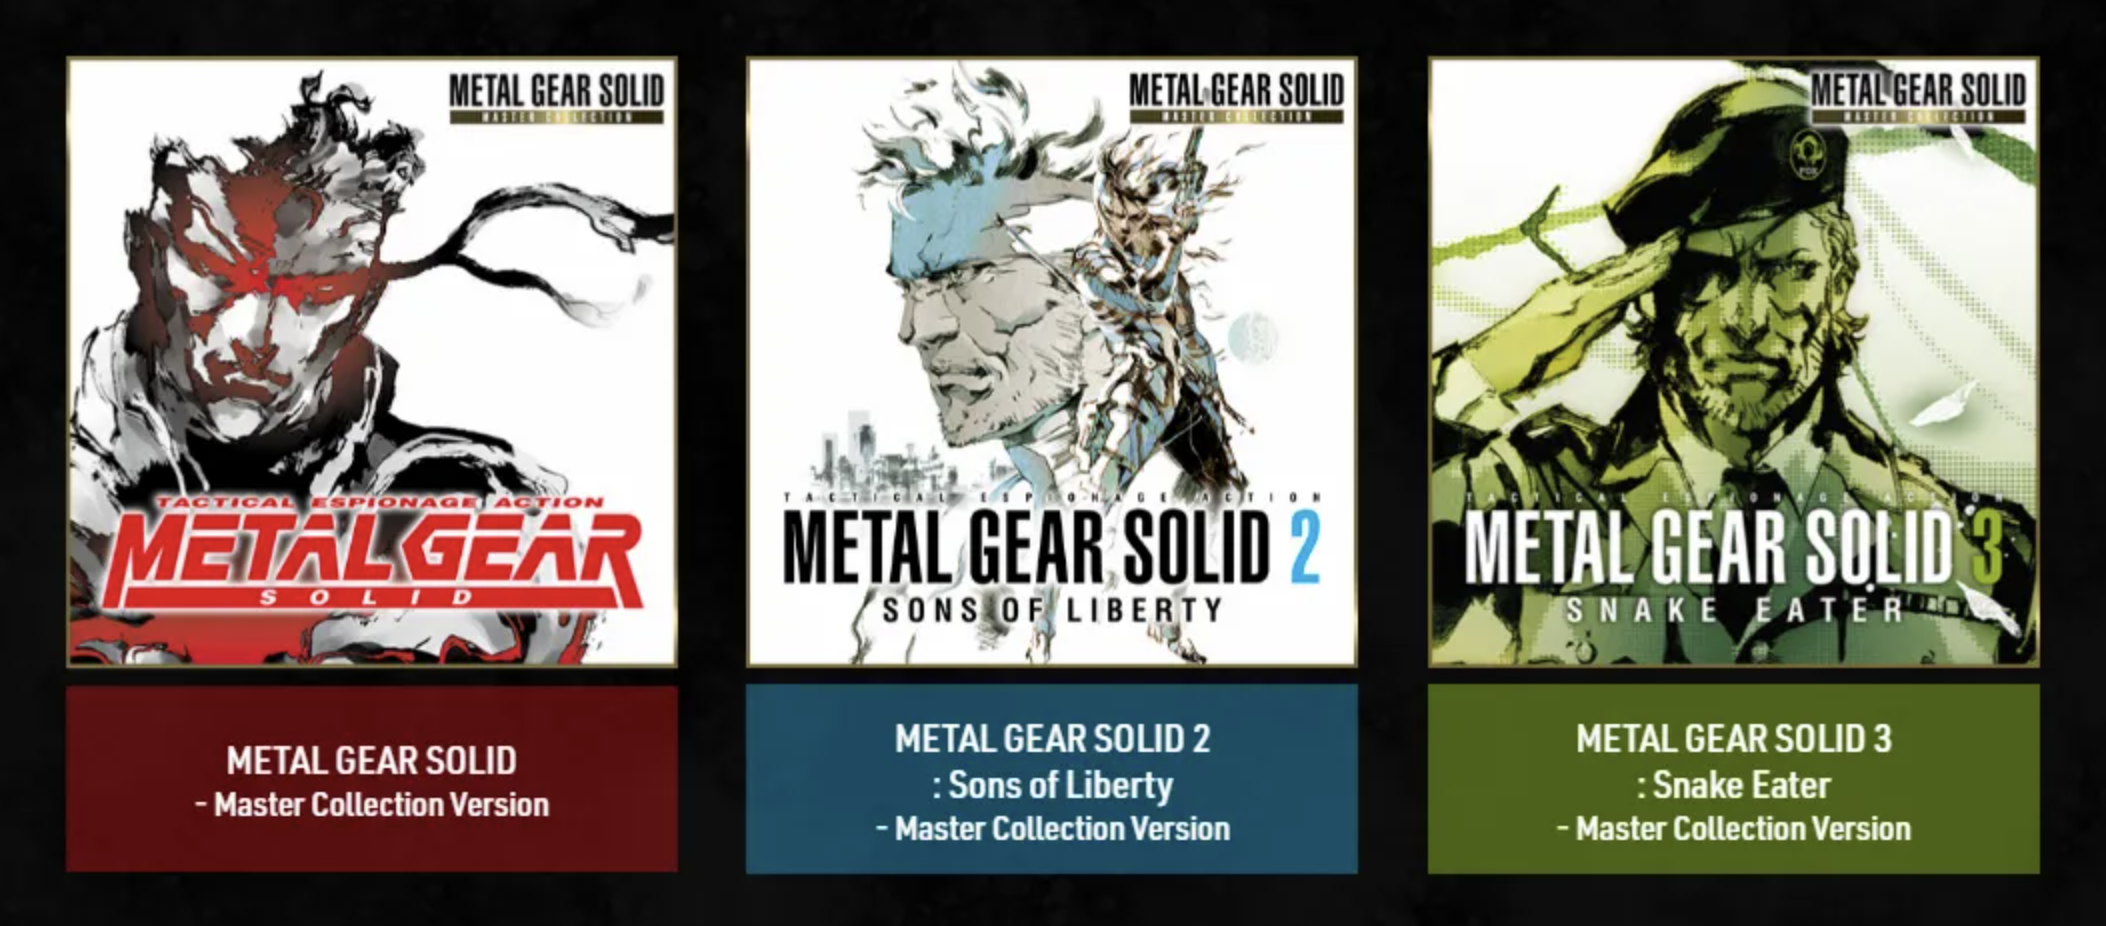 Metal Gear Solid Master Collection Looks Like Konami Doing It